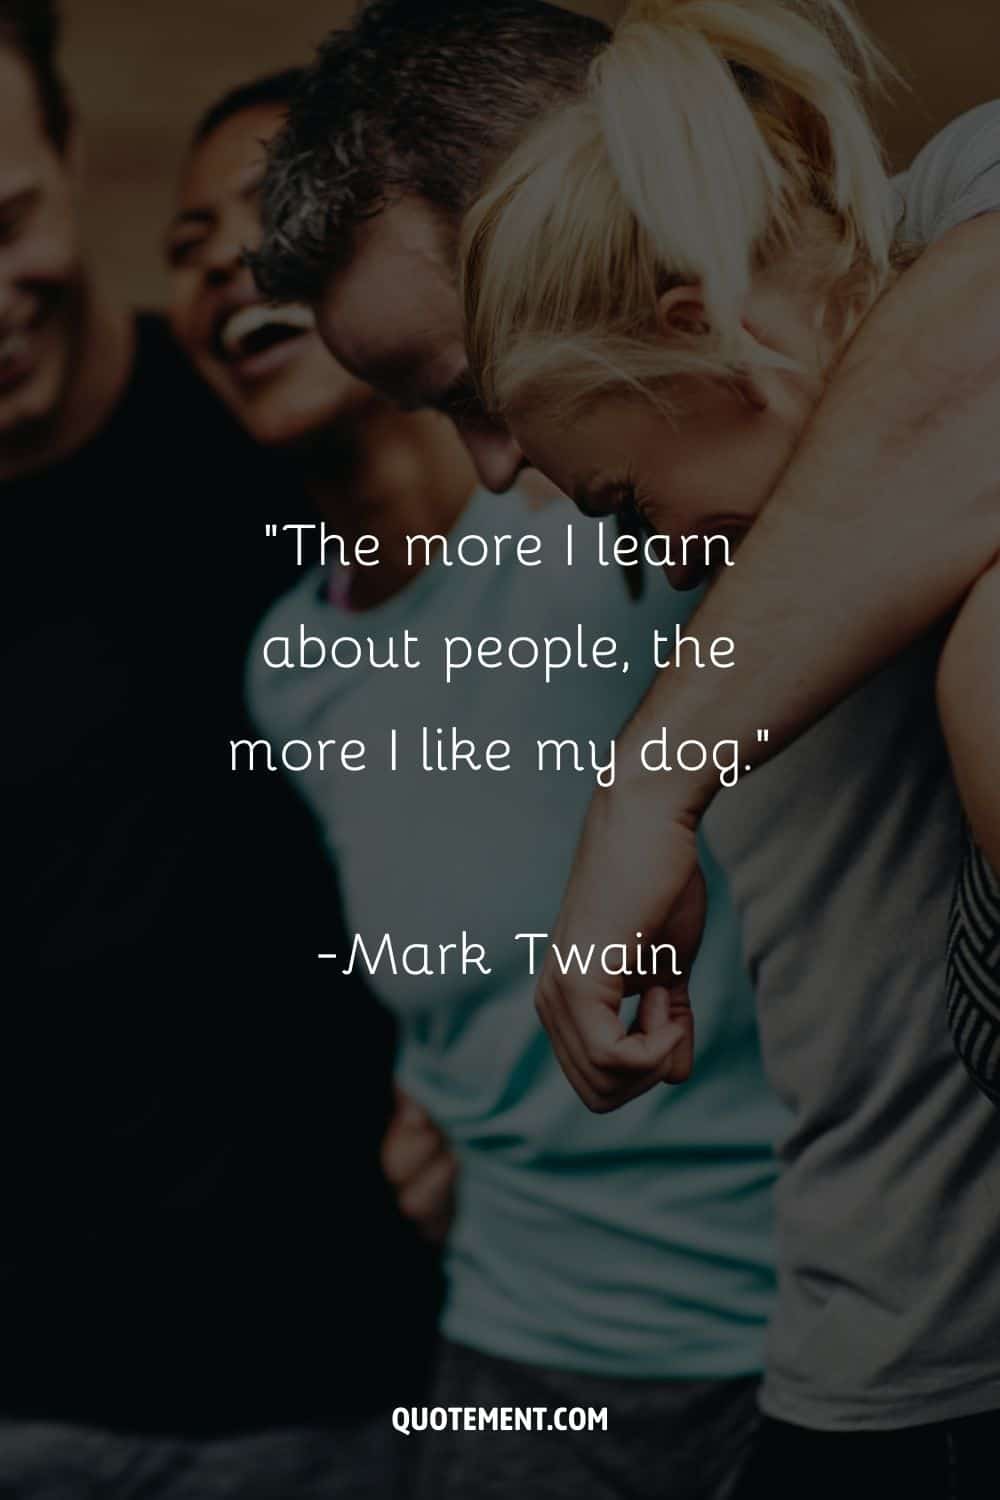 “The more I learn about people, the more I like my dog.” ― Mark Twain